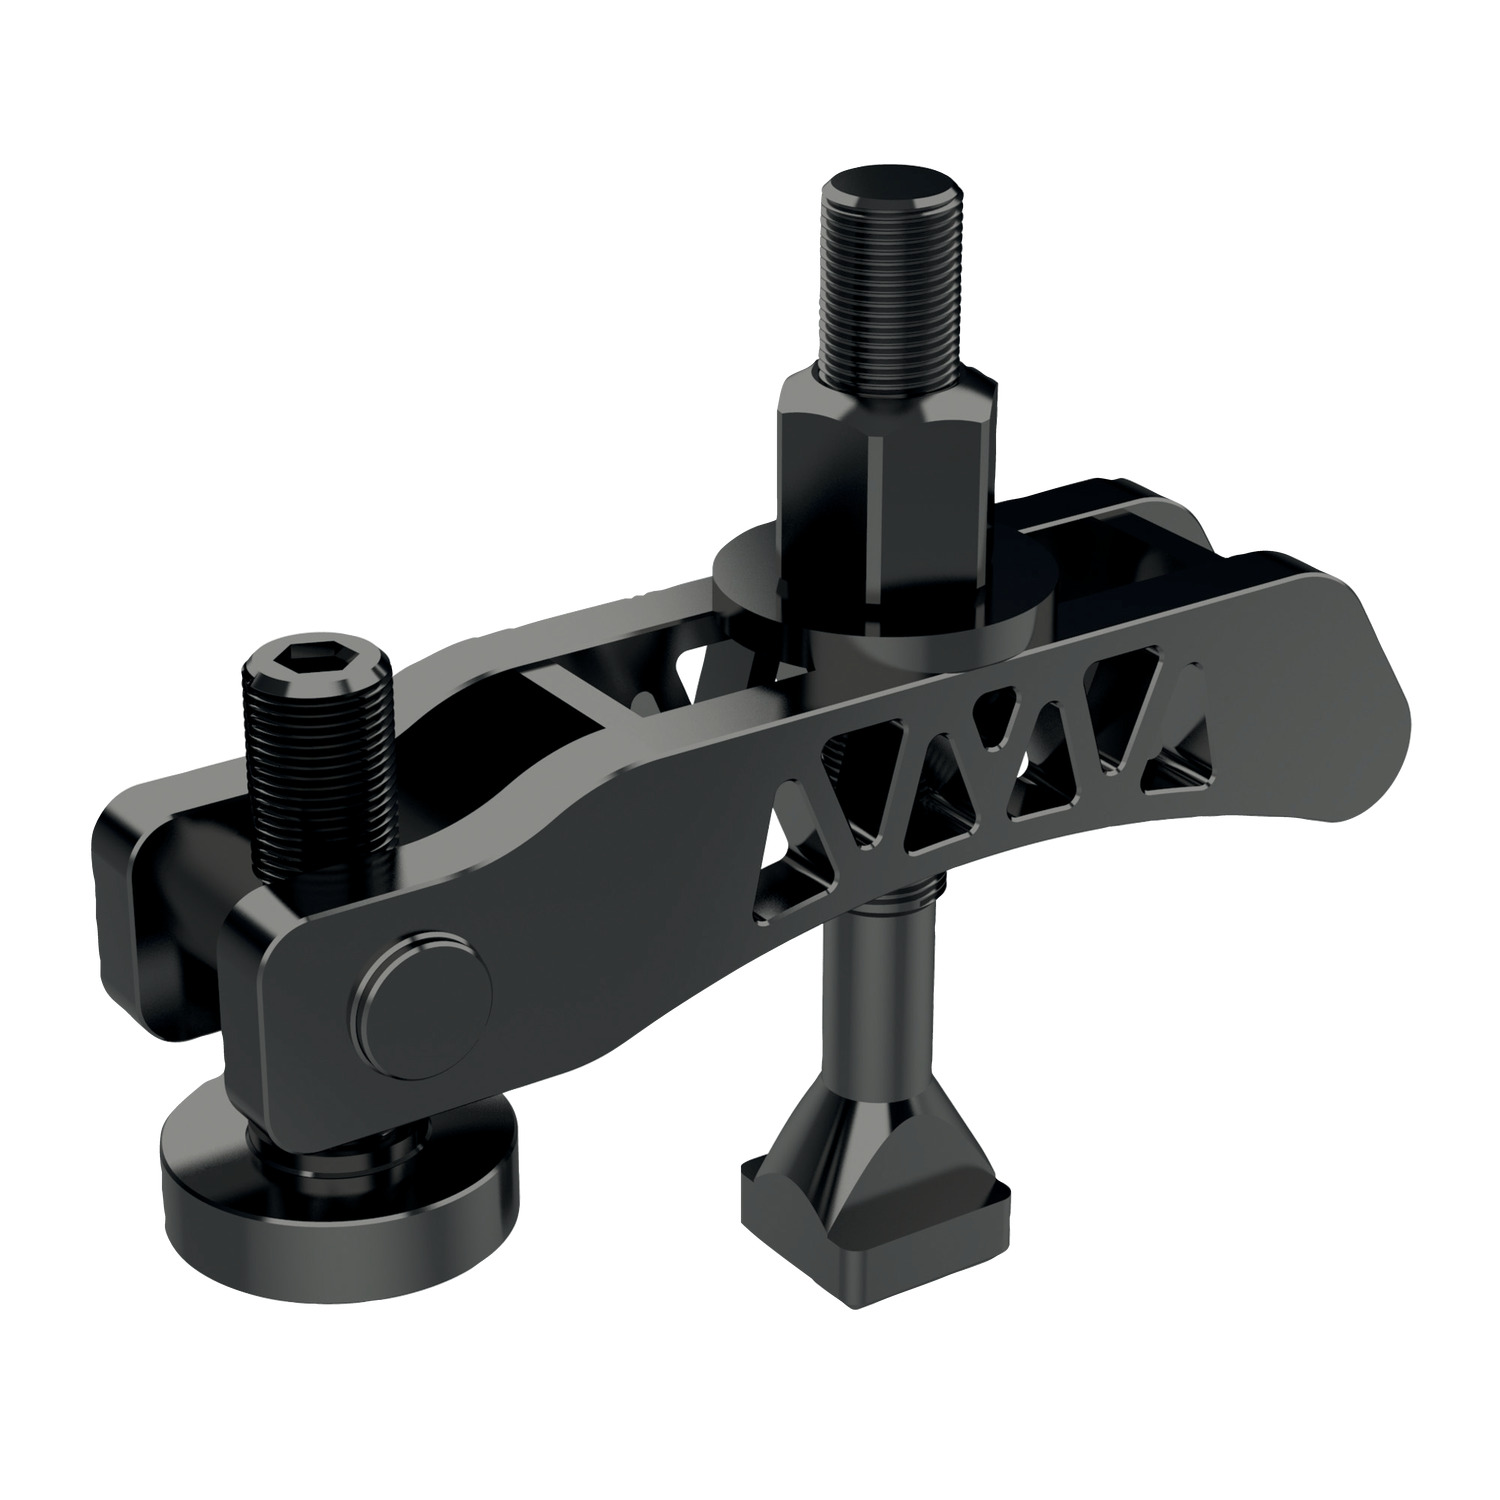 Product 10610.2, Scalloped Clamp with adjustable support screw / 